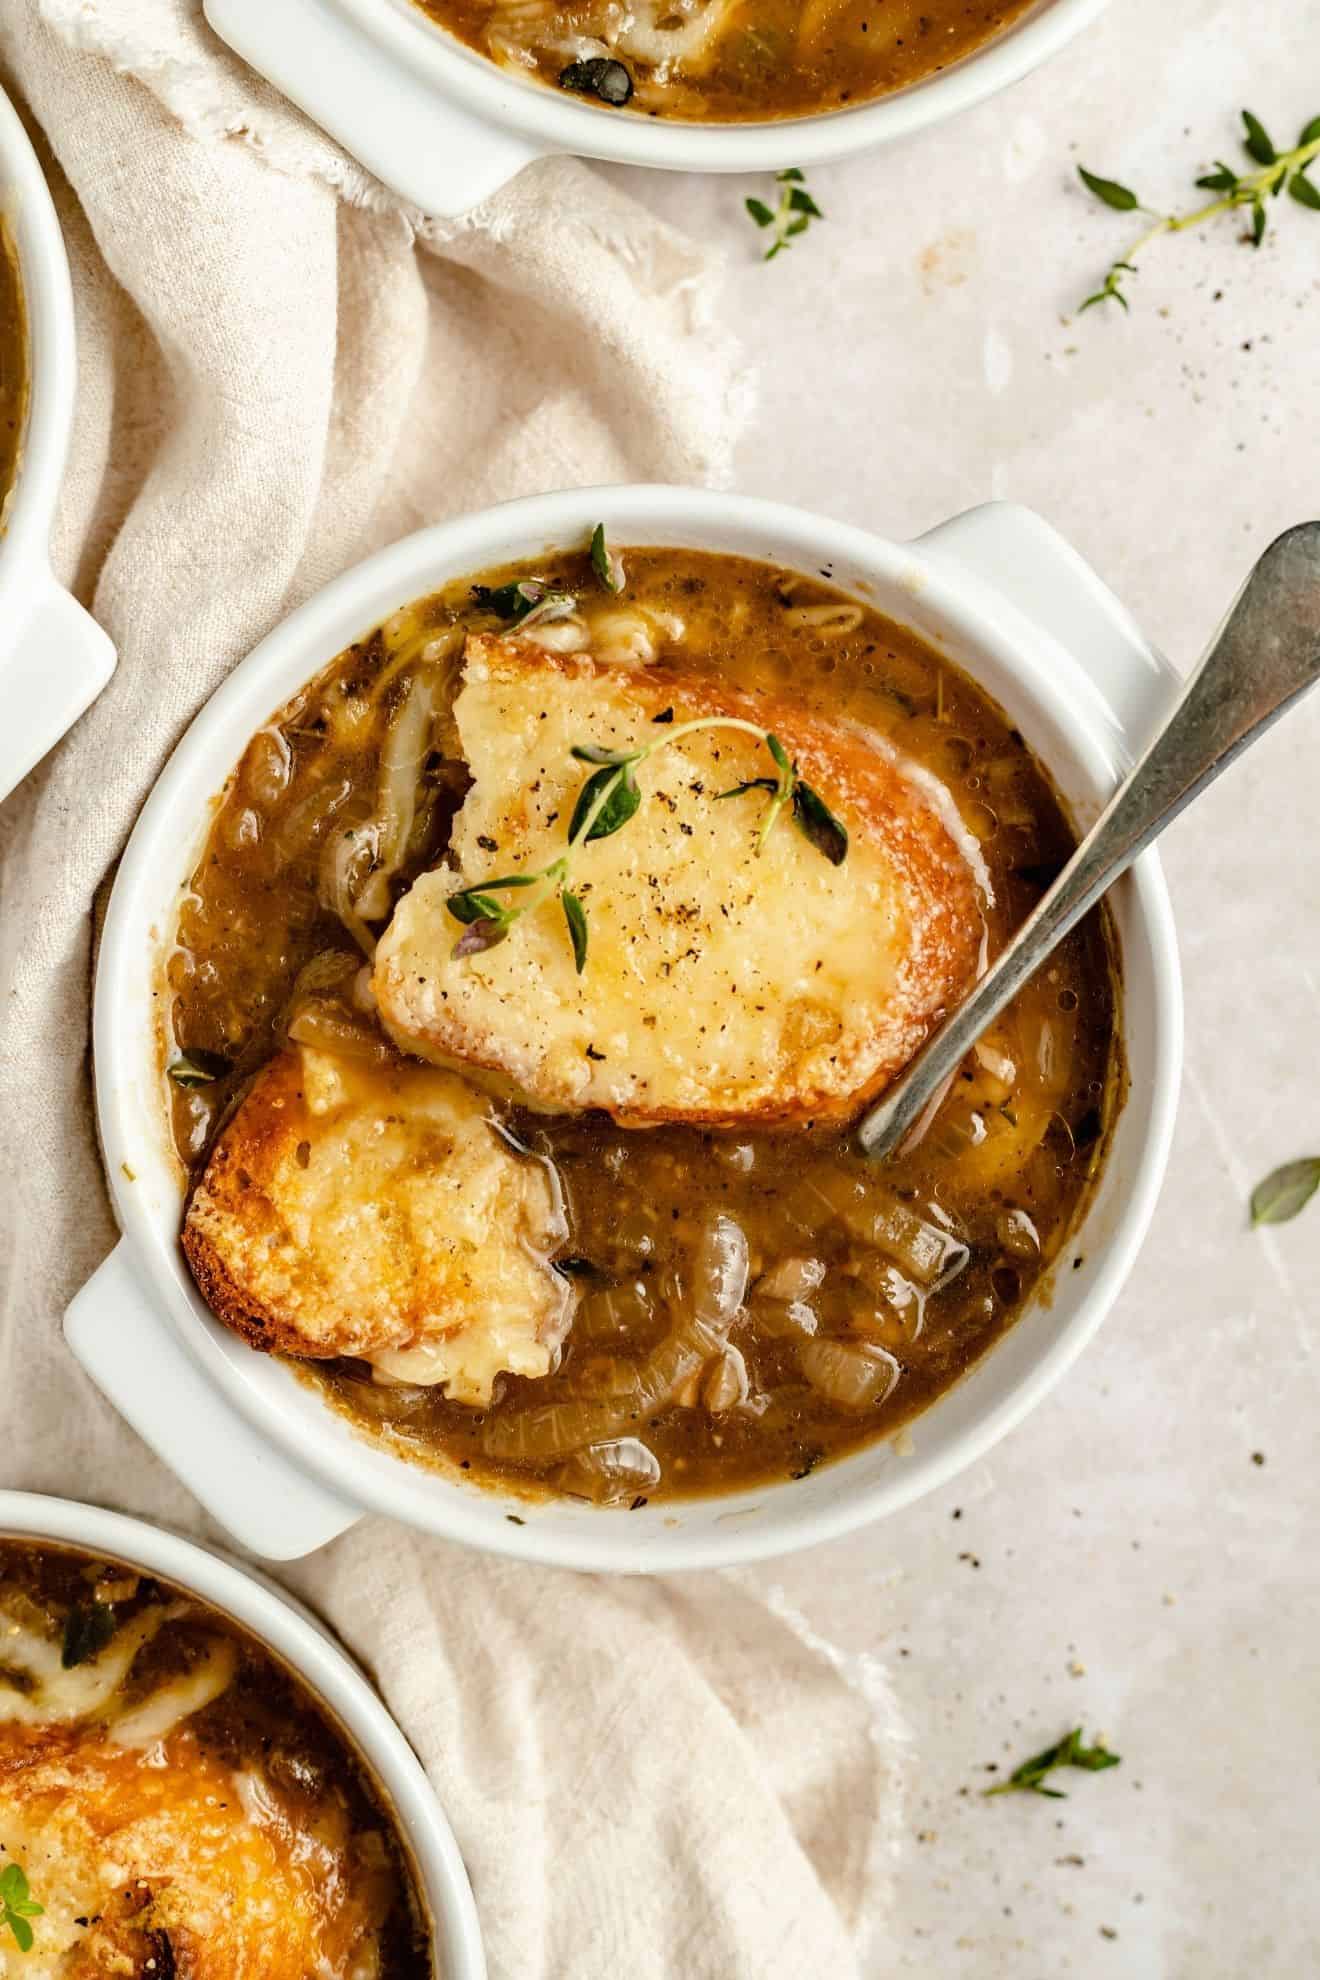 Vegetarian French Onion Soup - The Toasted Pine Nut